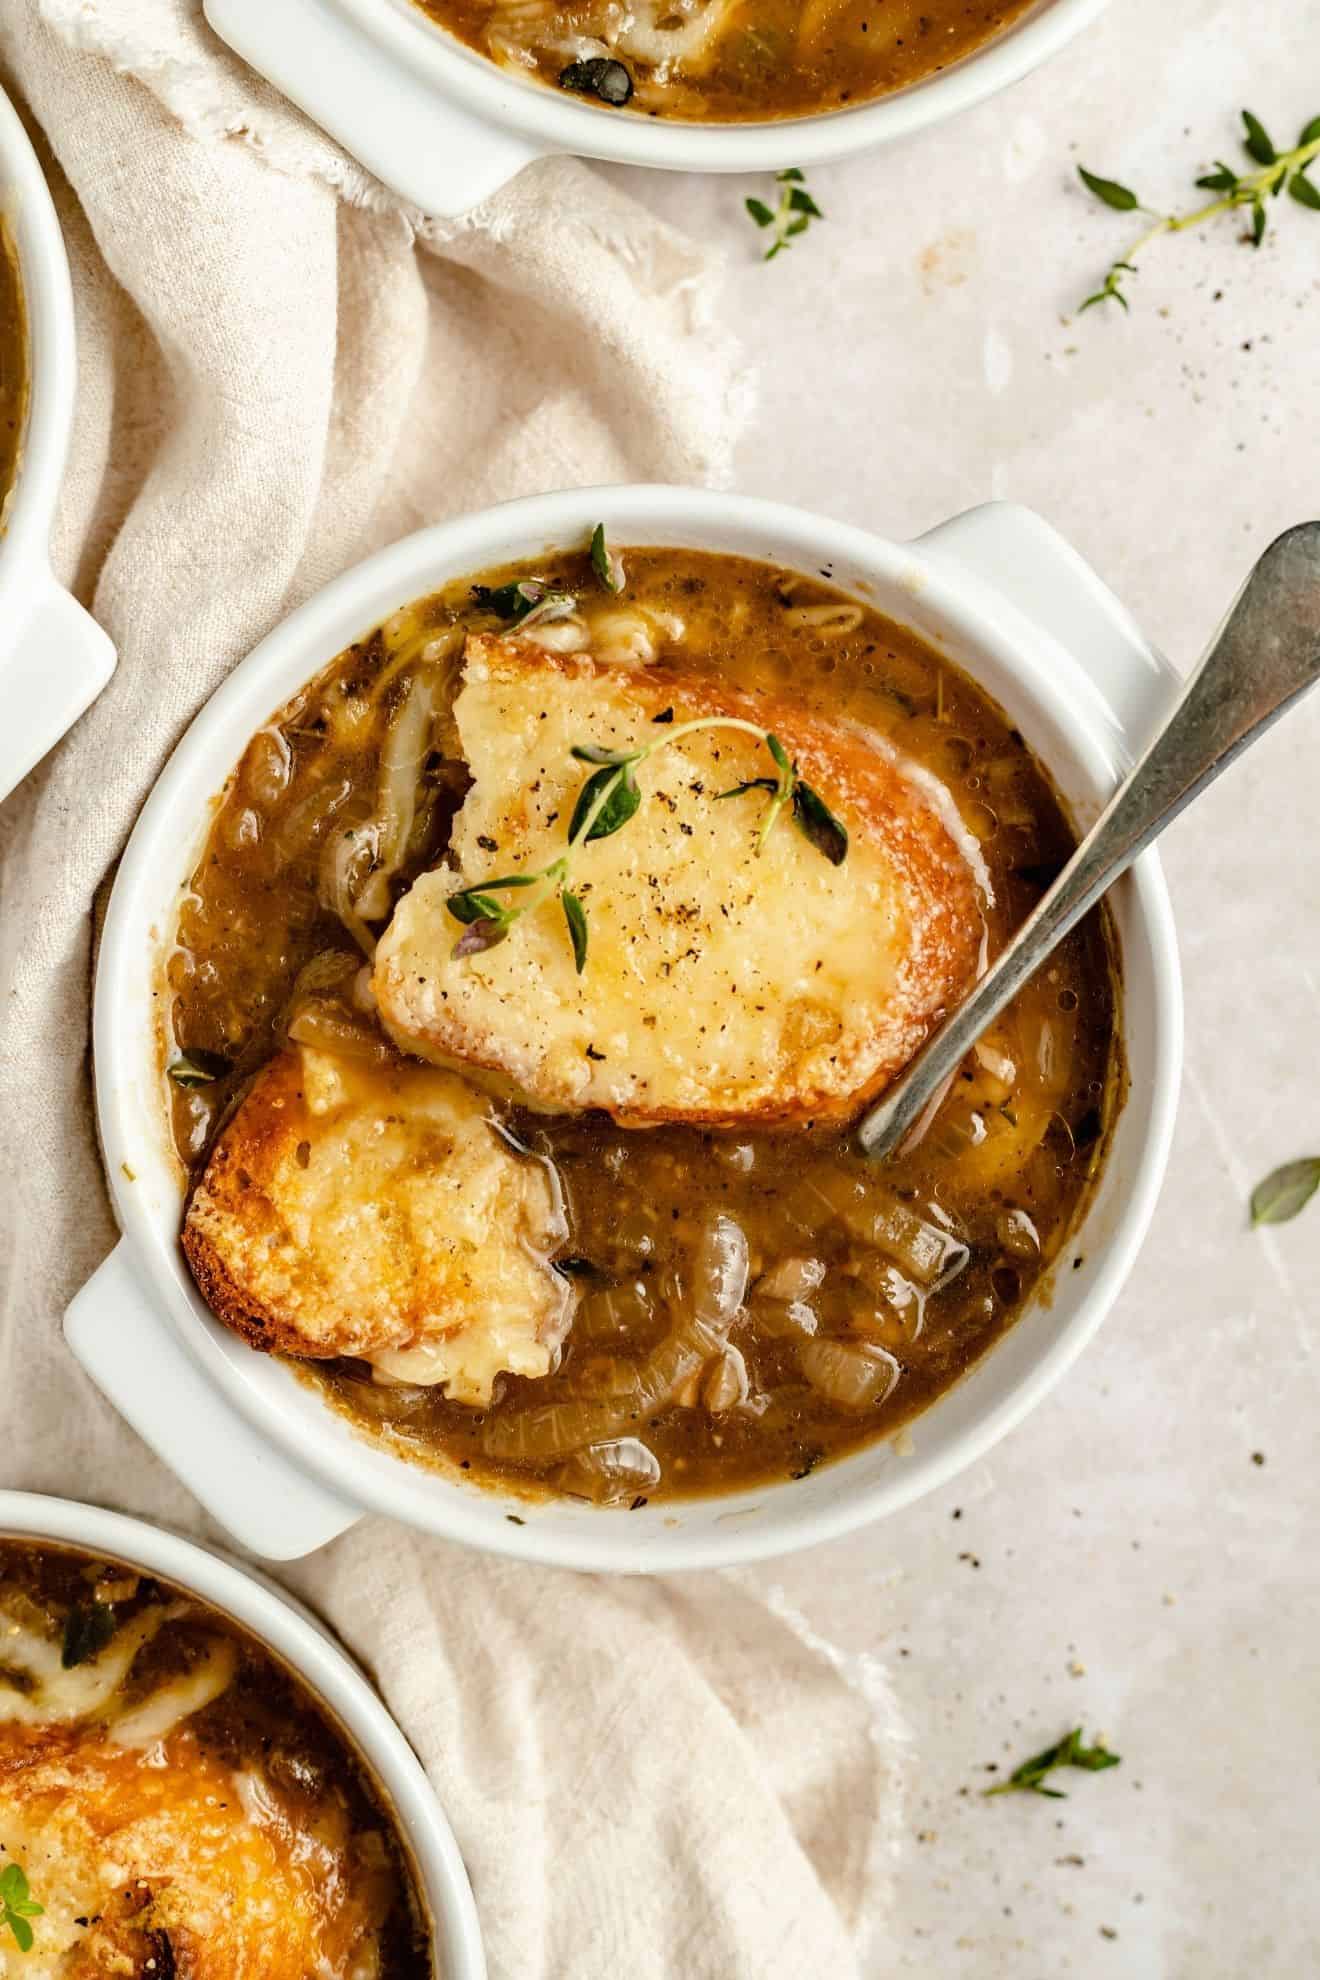 Vegetarian French Onion Soup - The Toasted Pine Nut